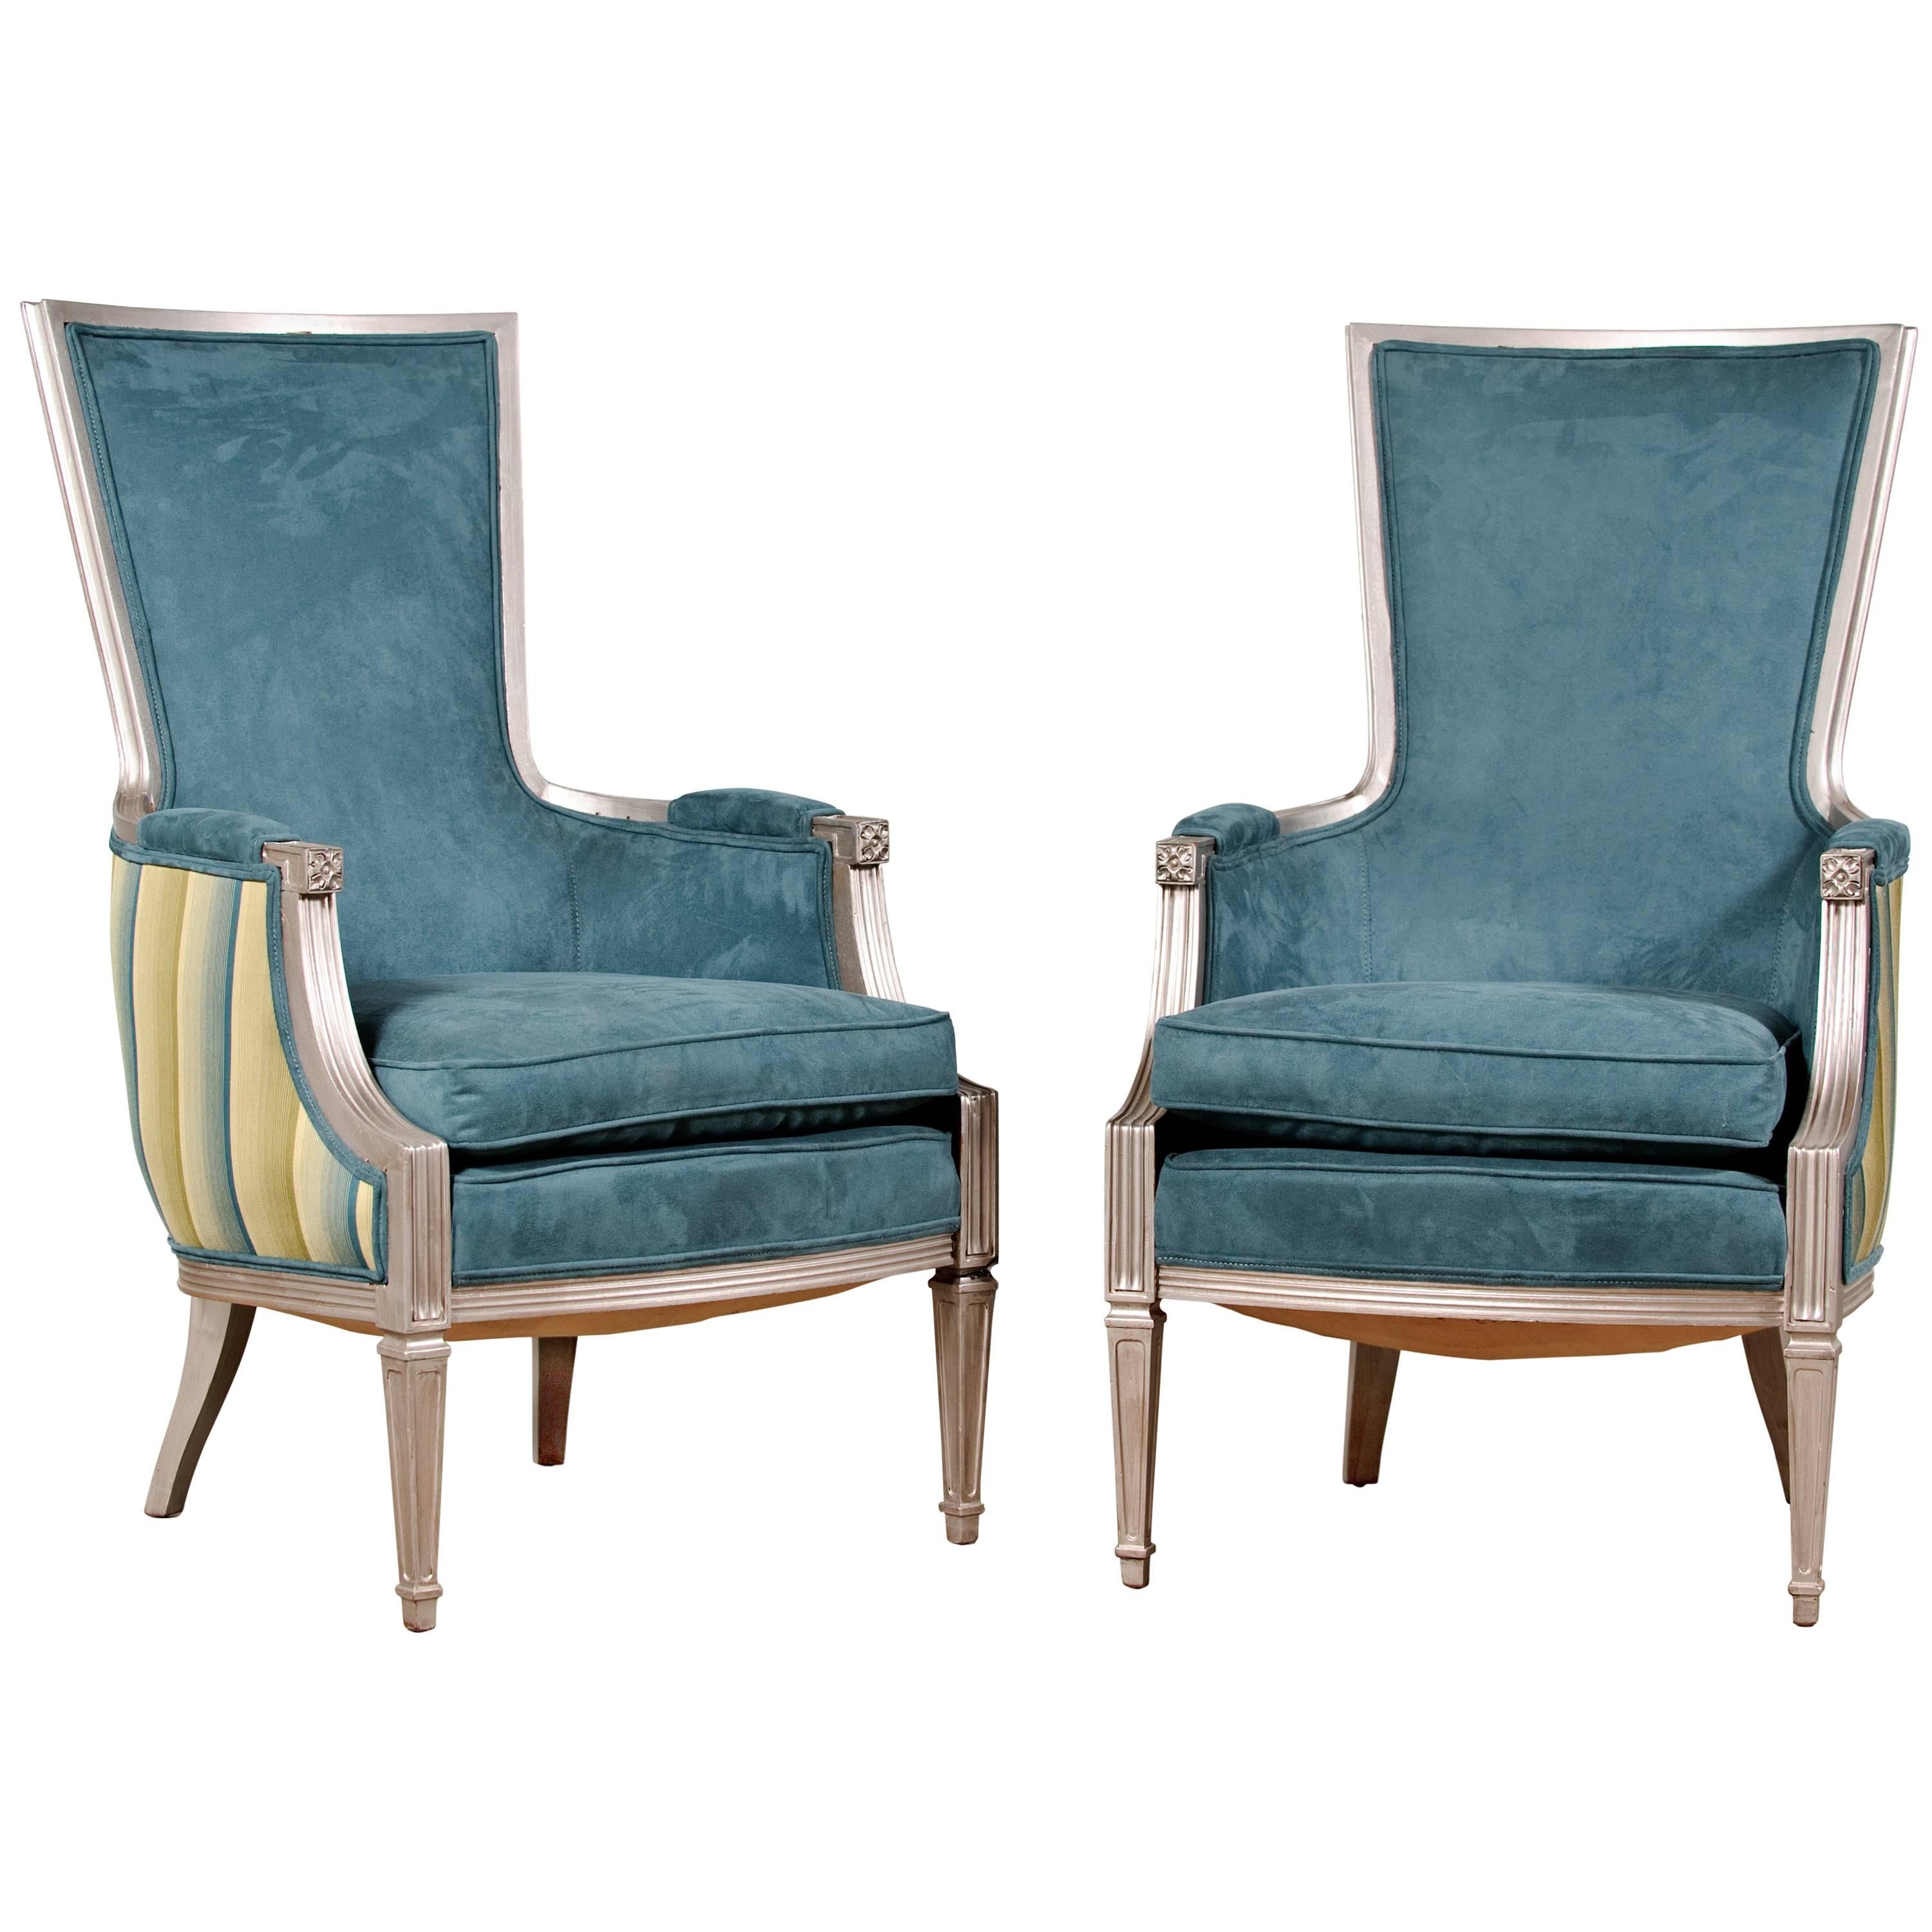 Vintage Neoclassic Chairs in Aqua and Faux Silverleaf